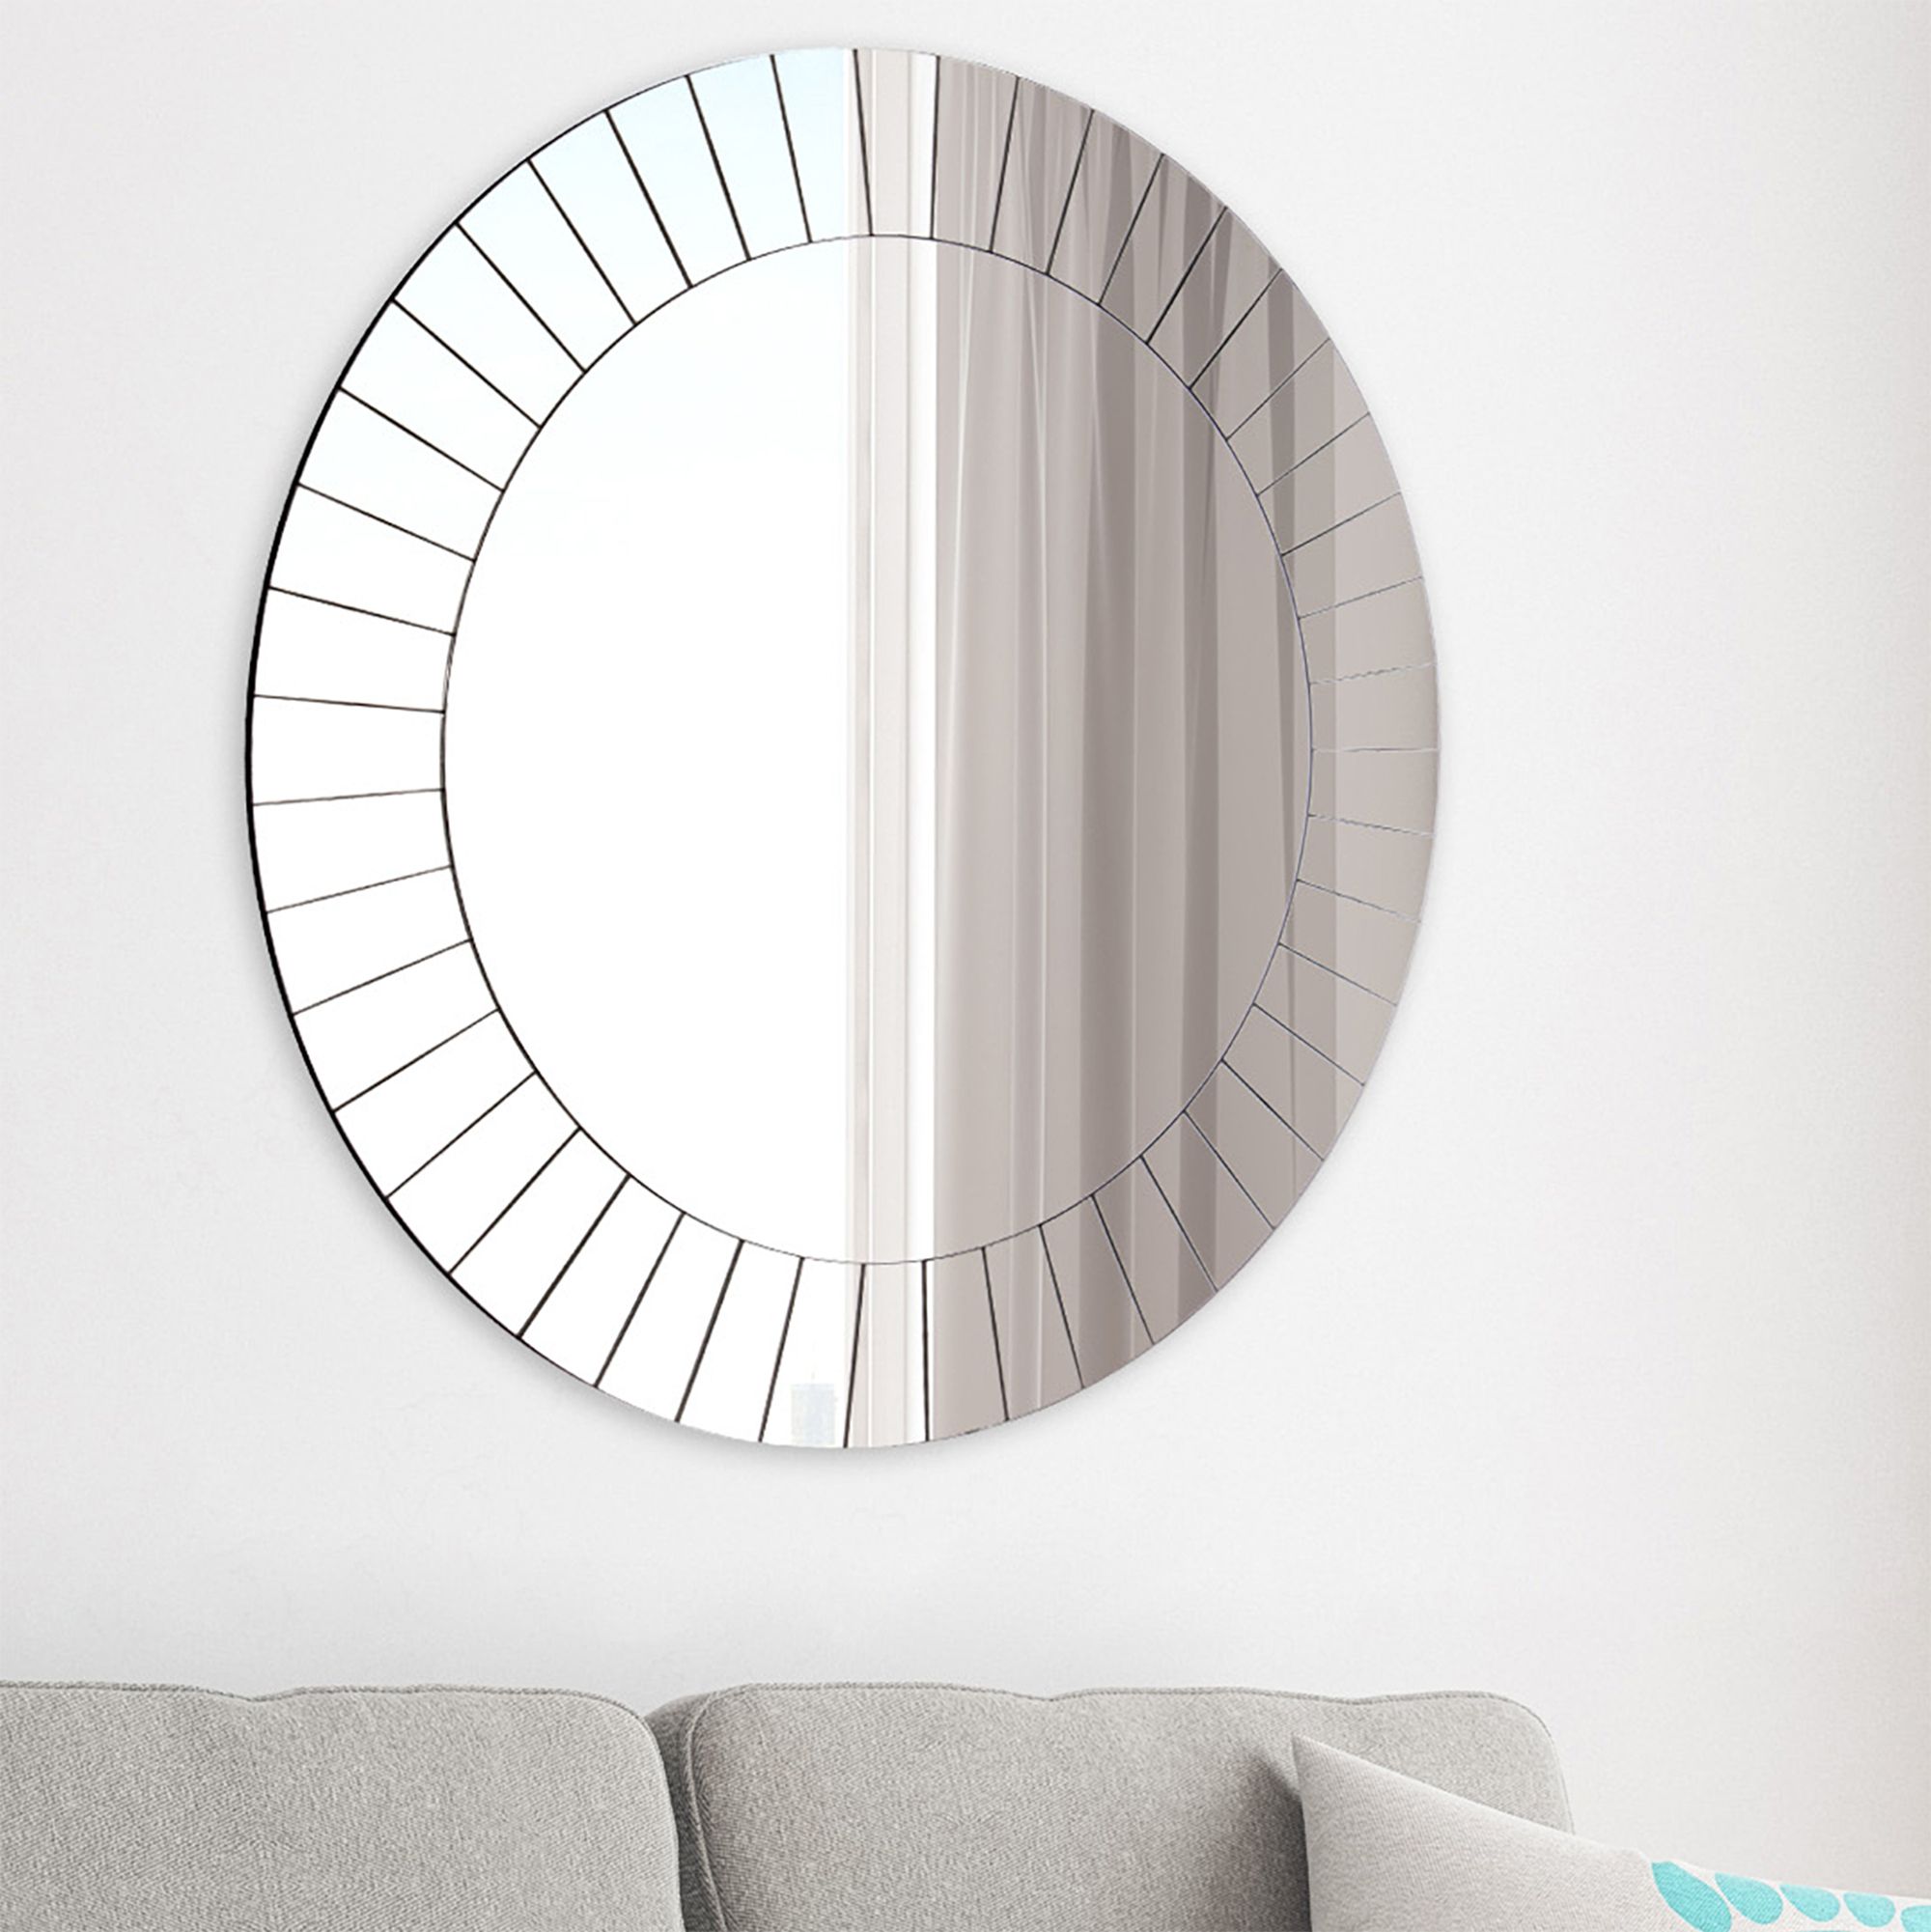 Frameless Beveled Round Wall Mirror 26"x26"gallery Solutions With Round Grid Wall Mirrors (View 6 of 15)